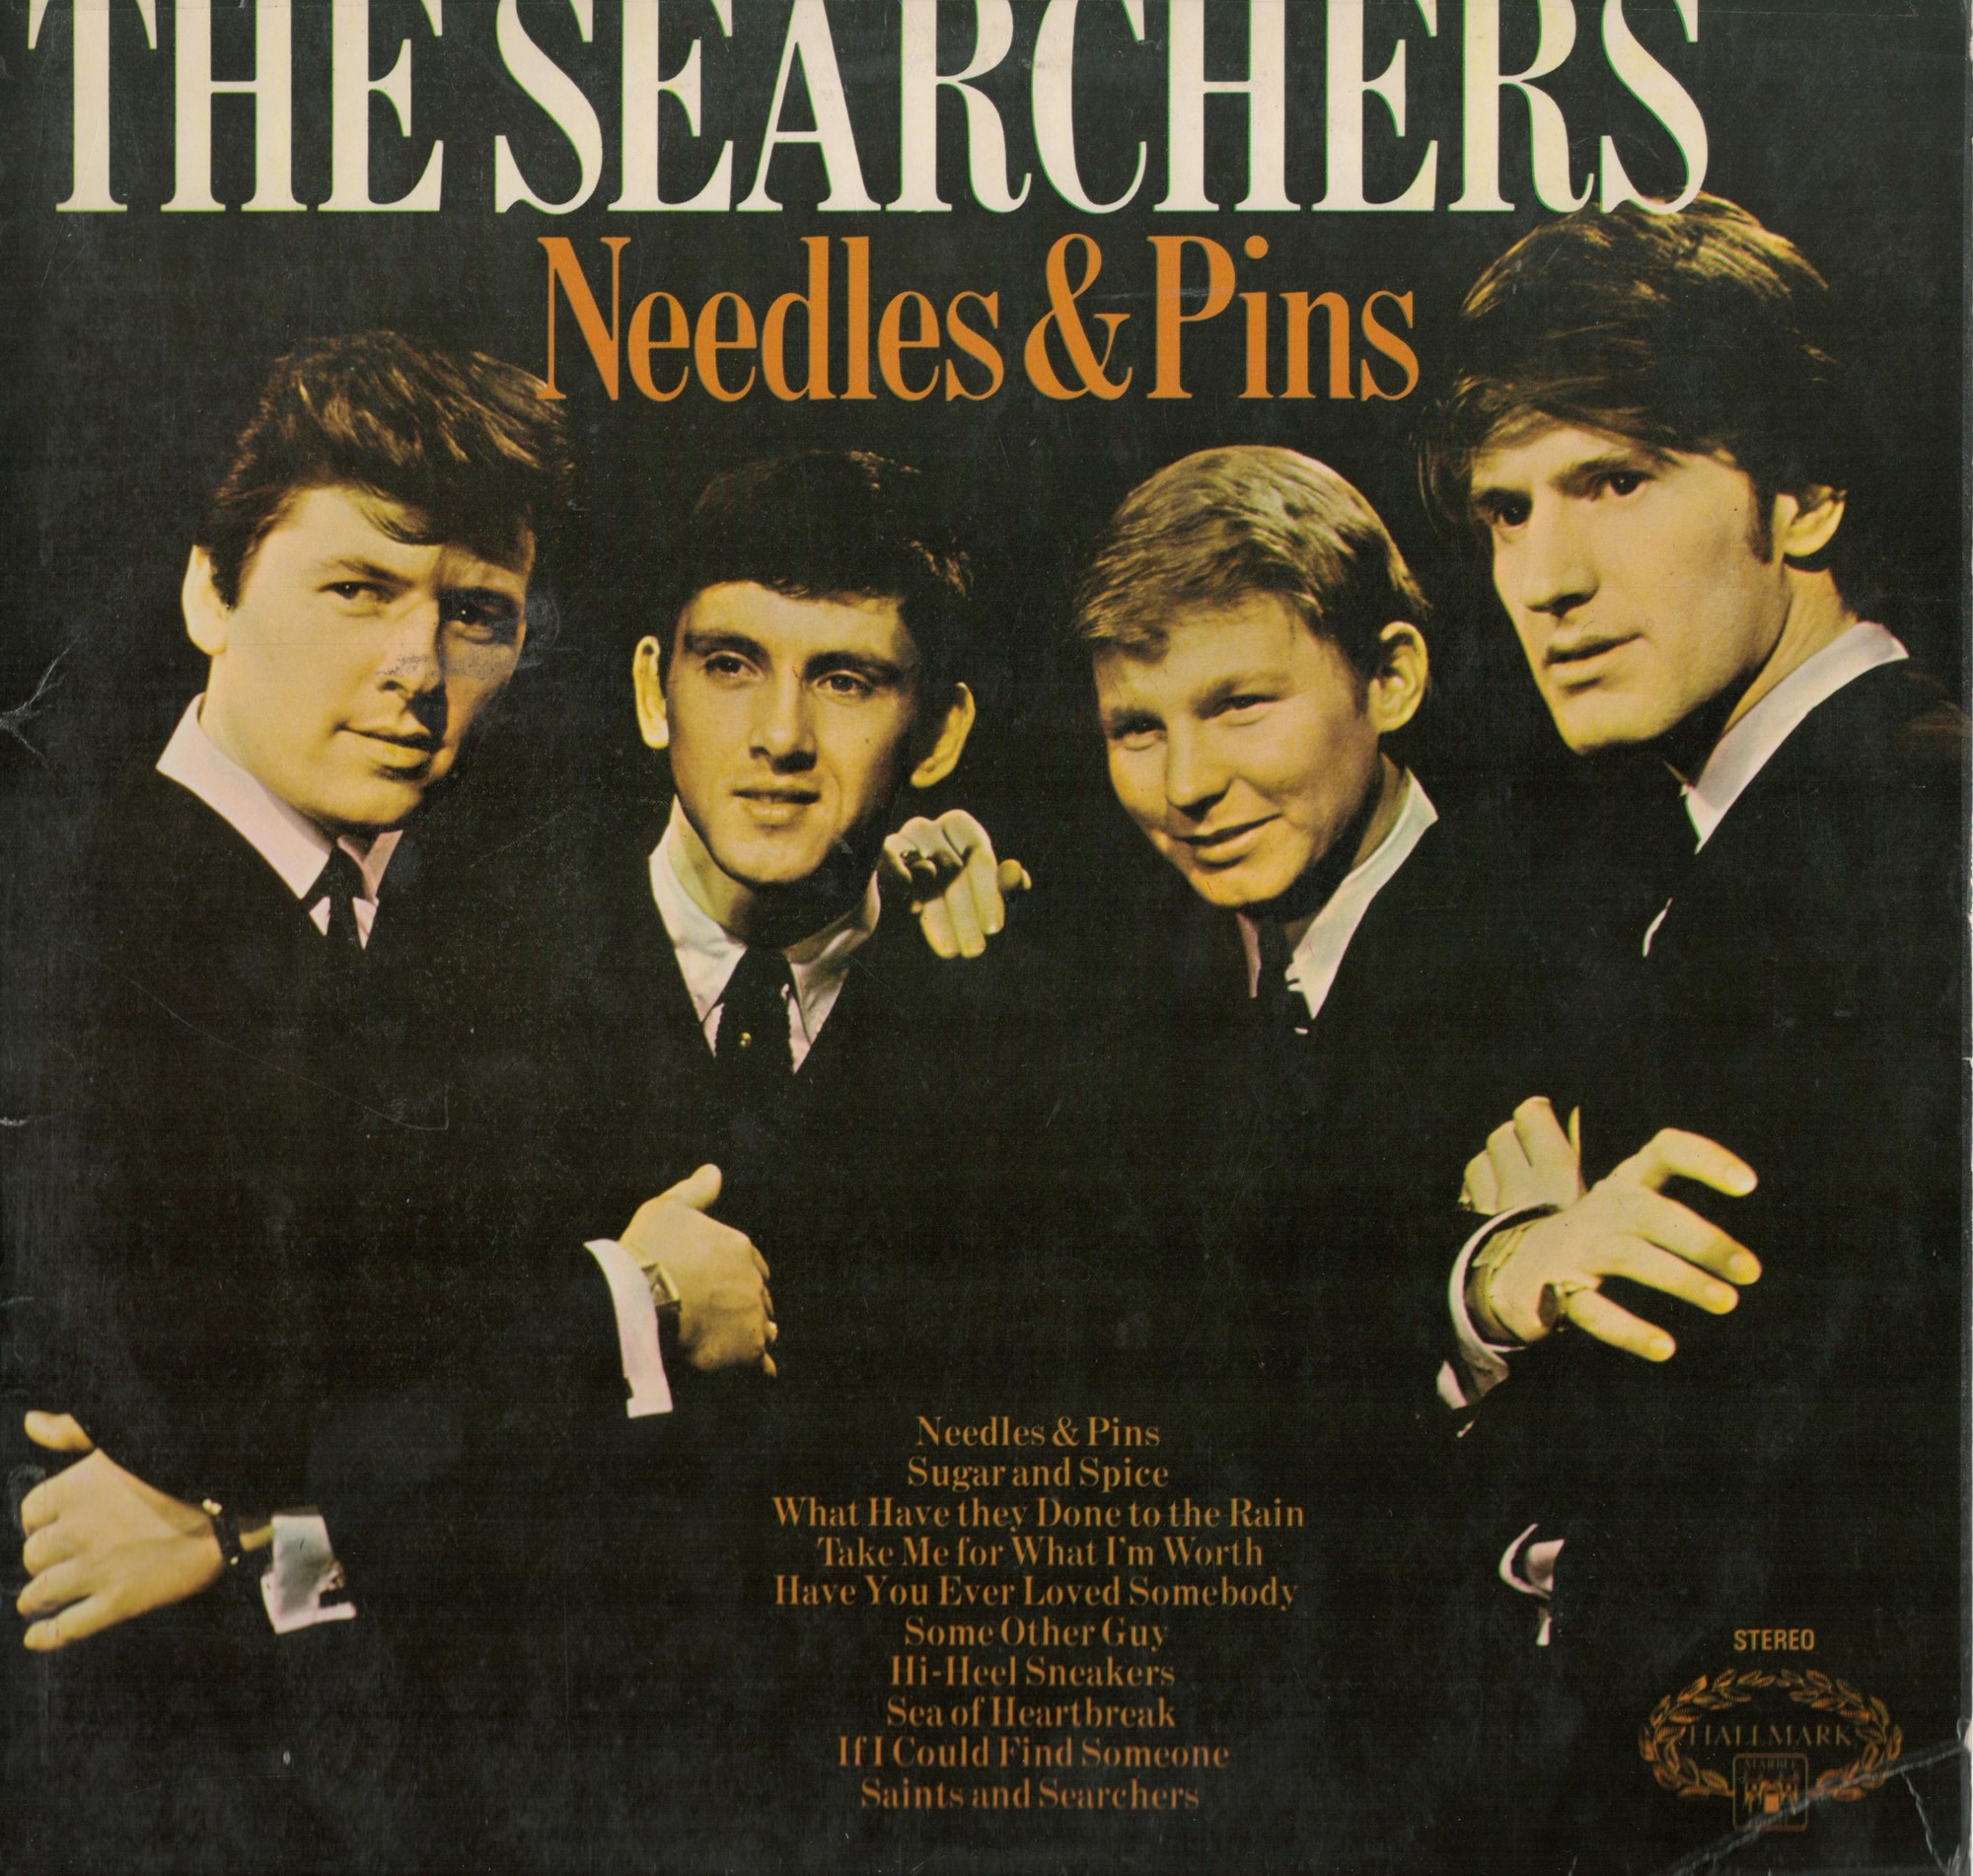 The Searchers 1960s Band Fully Signed 1971 Lp Record 'Needles And Pins' By John Mcnally, Frank - Image 2 of 2